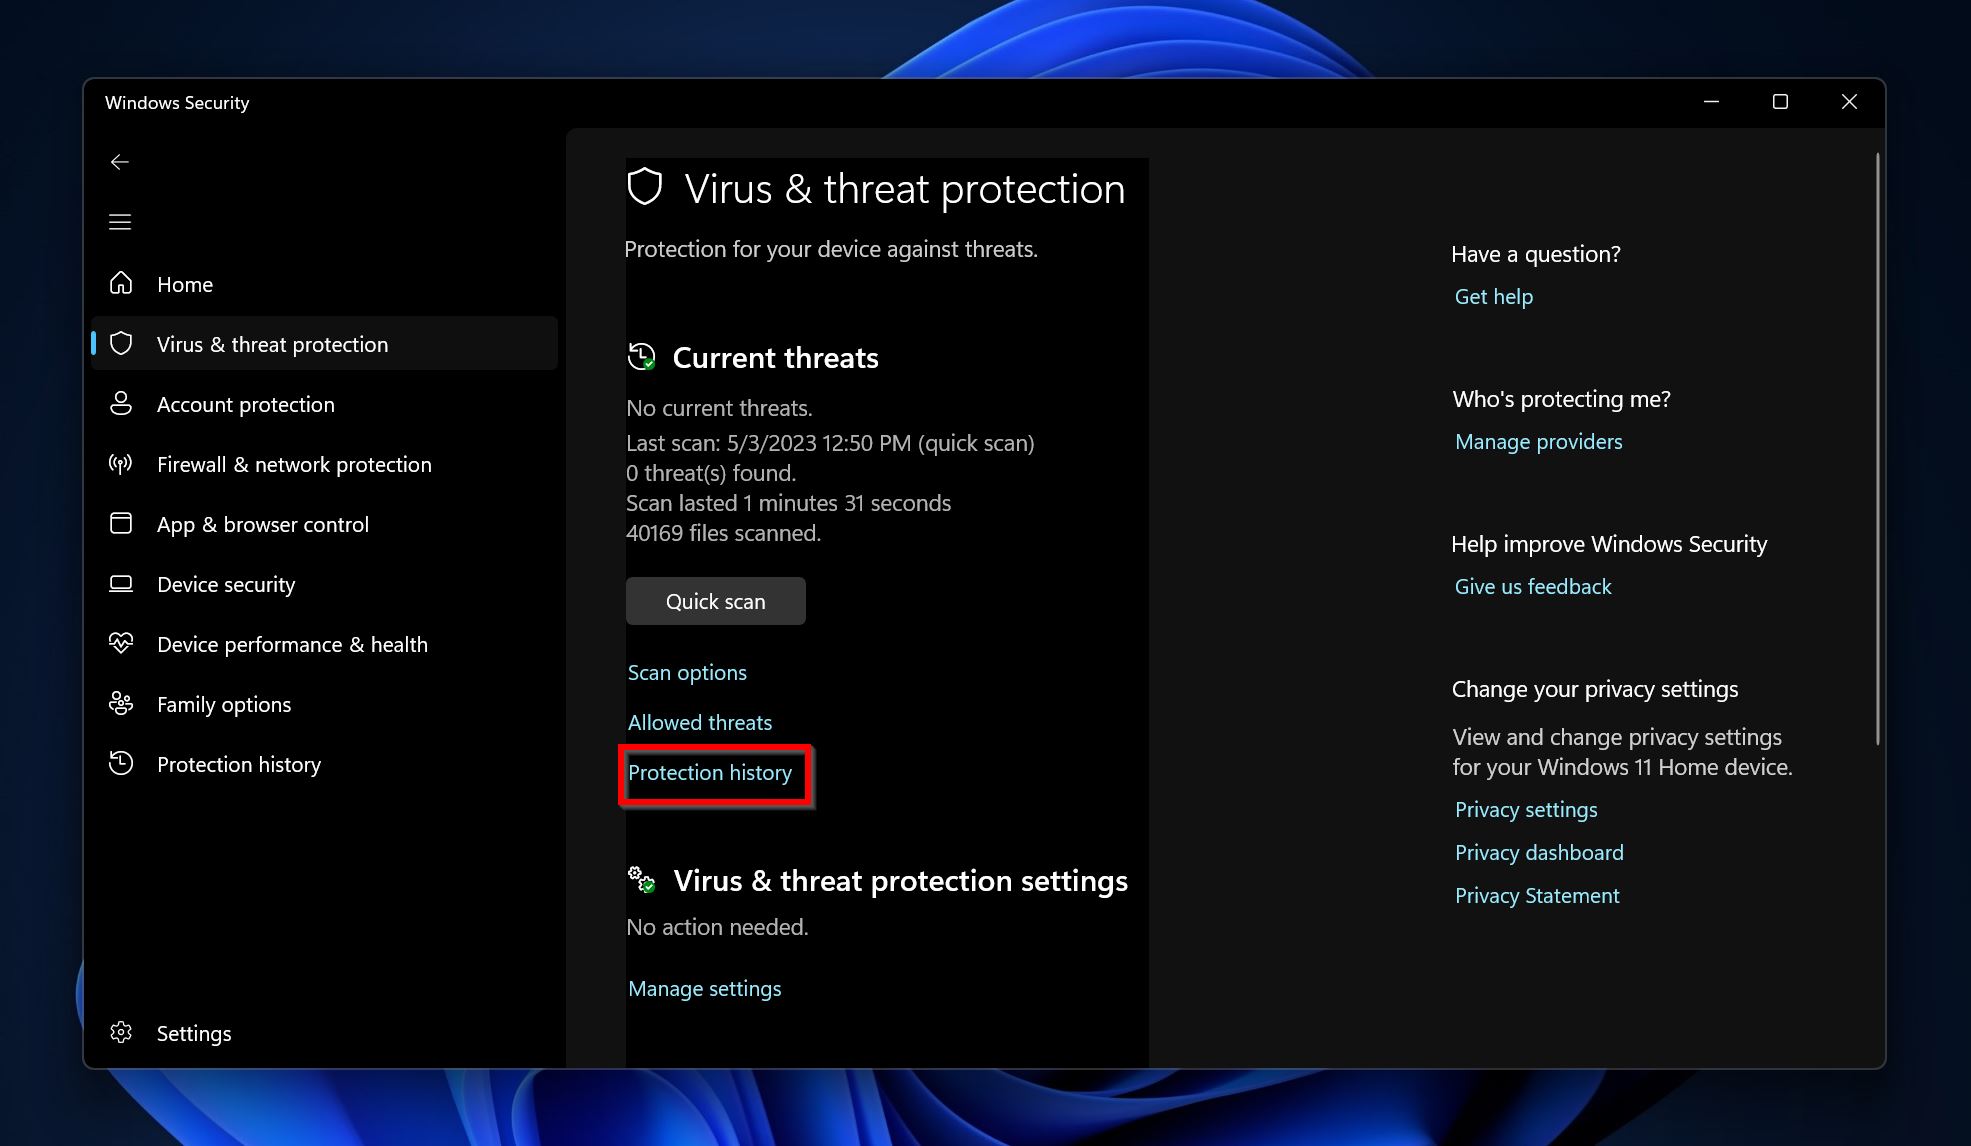 Protection history option in Windows Defender.